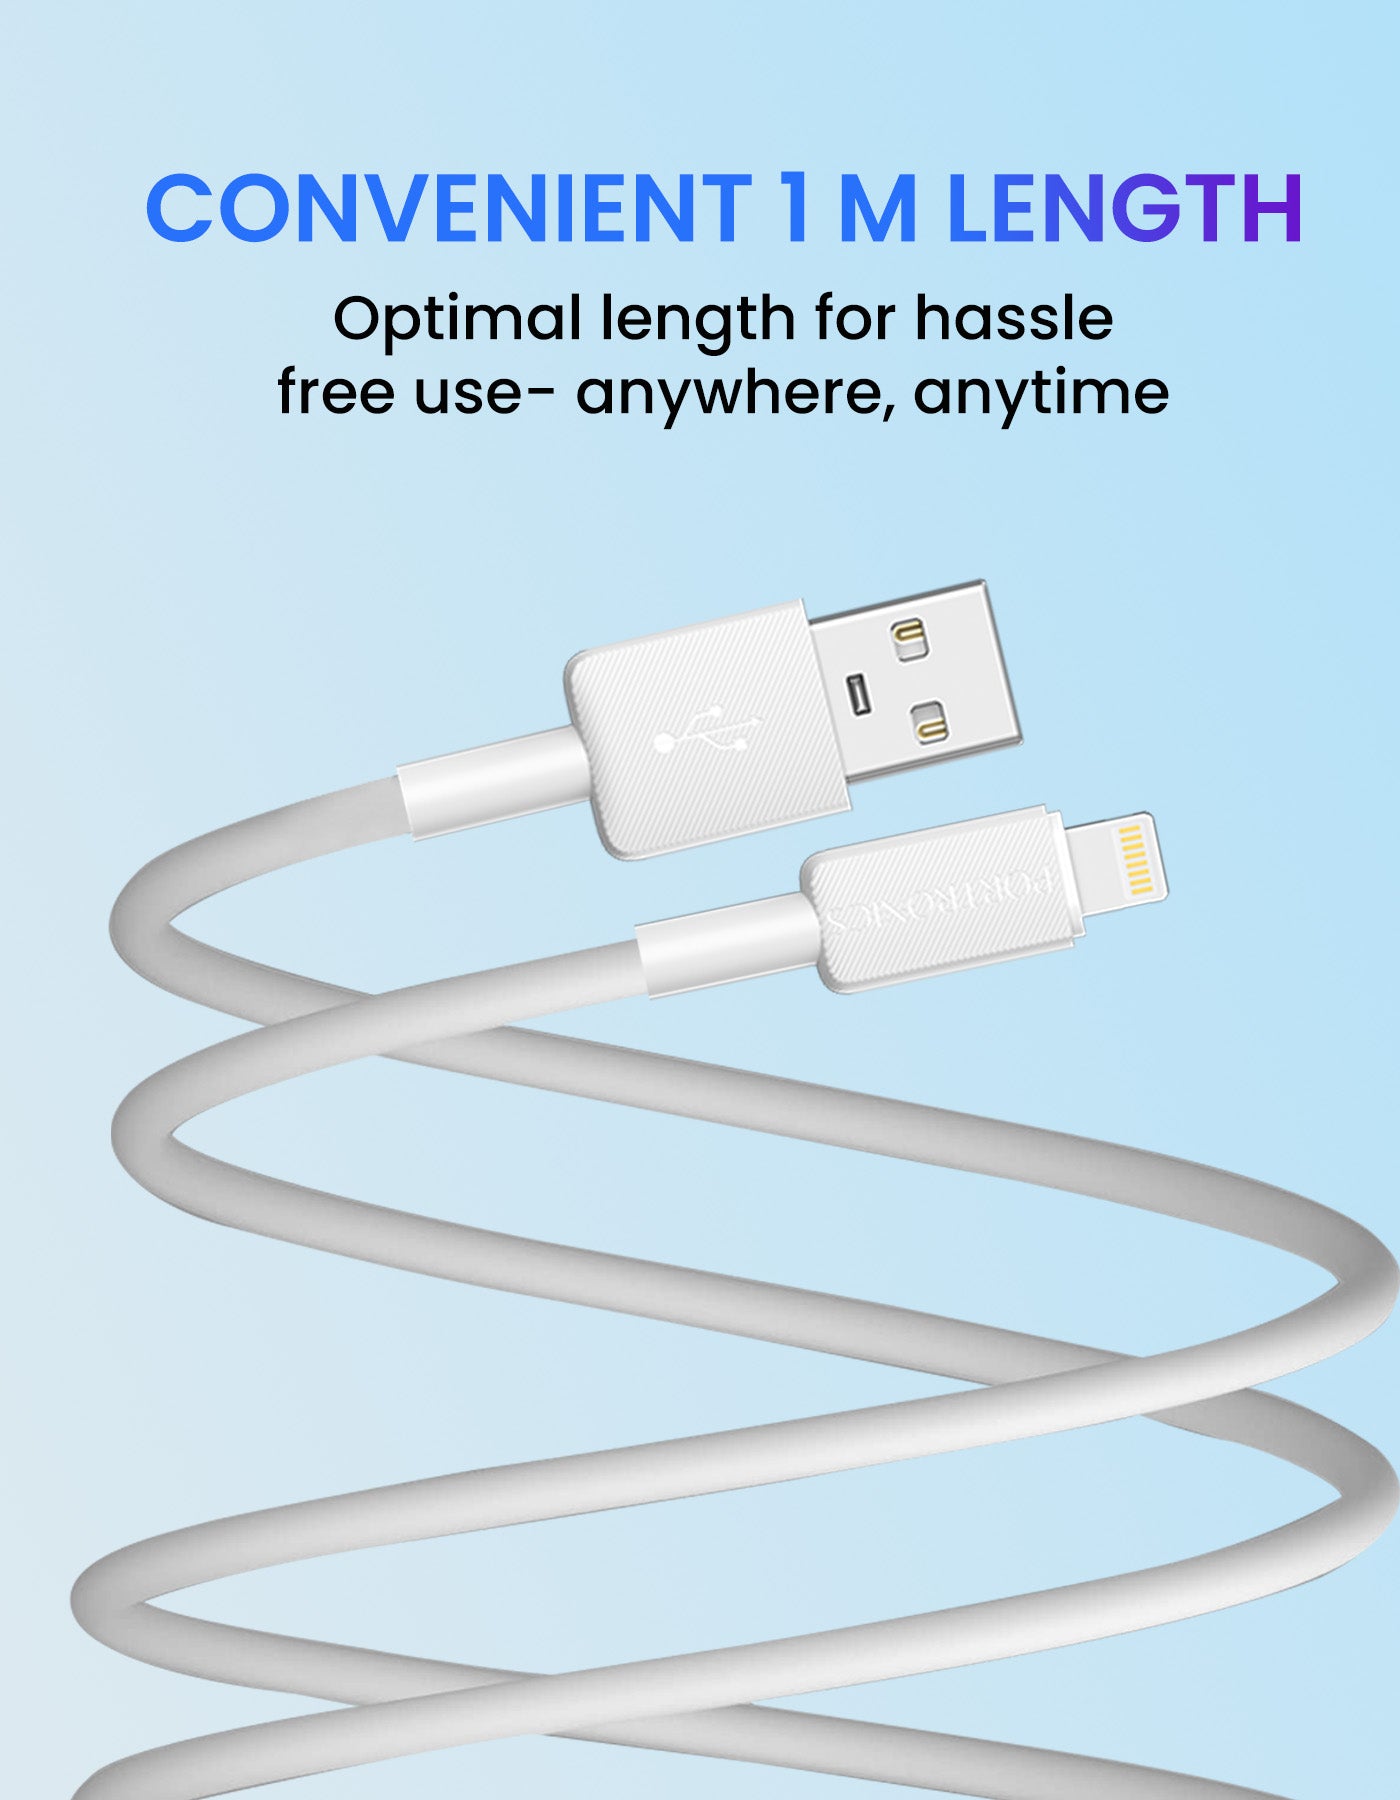 Portronics Konnect Link - 8 pin Fast charging Cable for Iphone|fast data transfer cable| fast charging cable for iphone| usb cable for iphone 